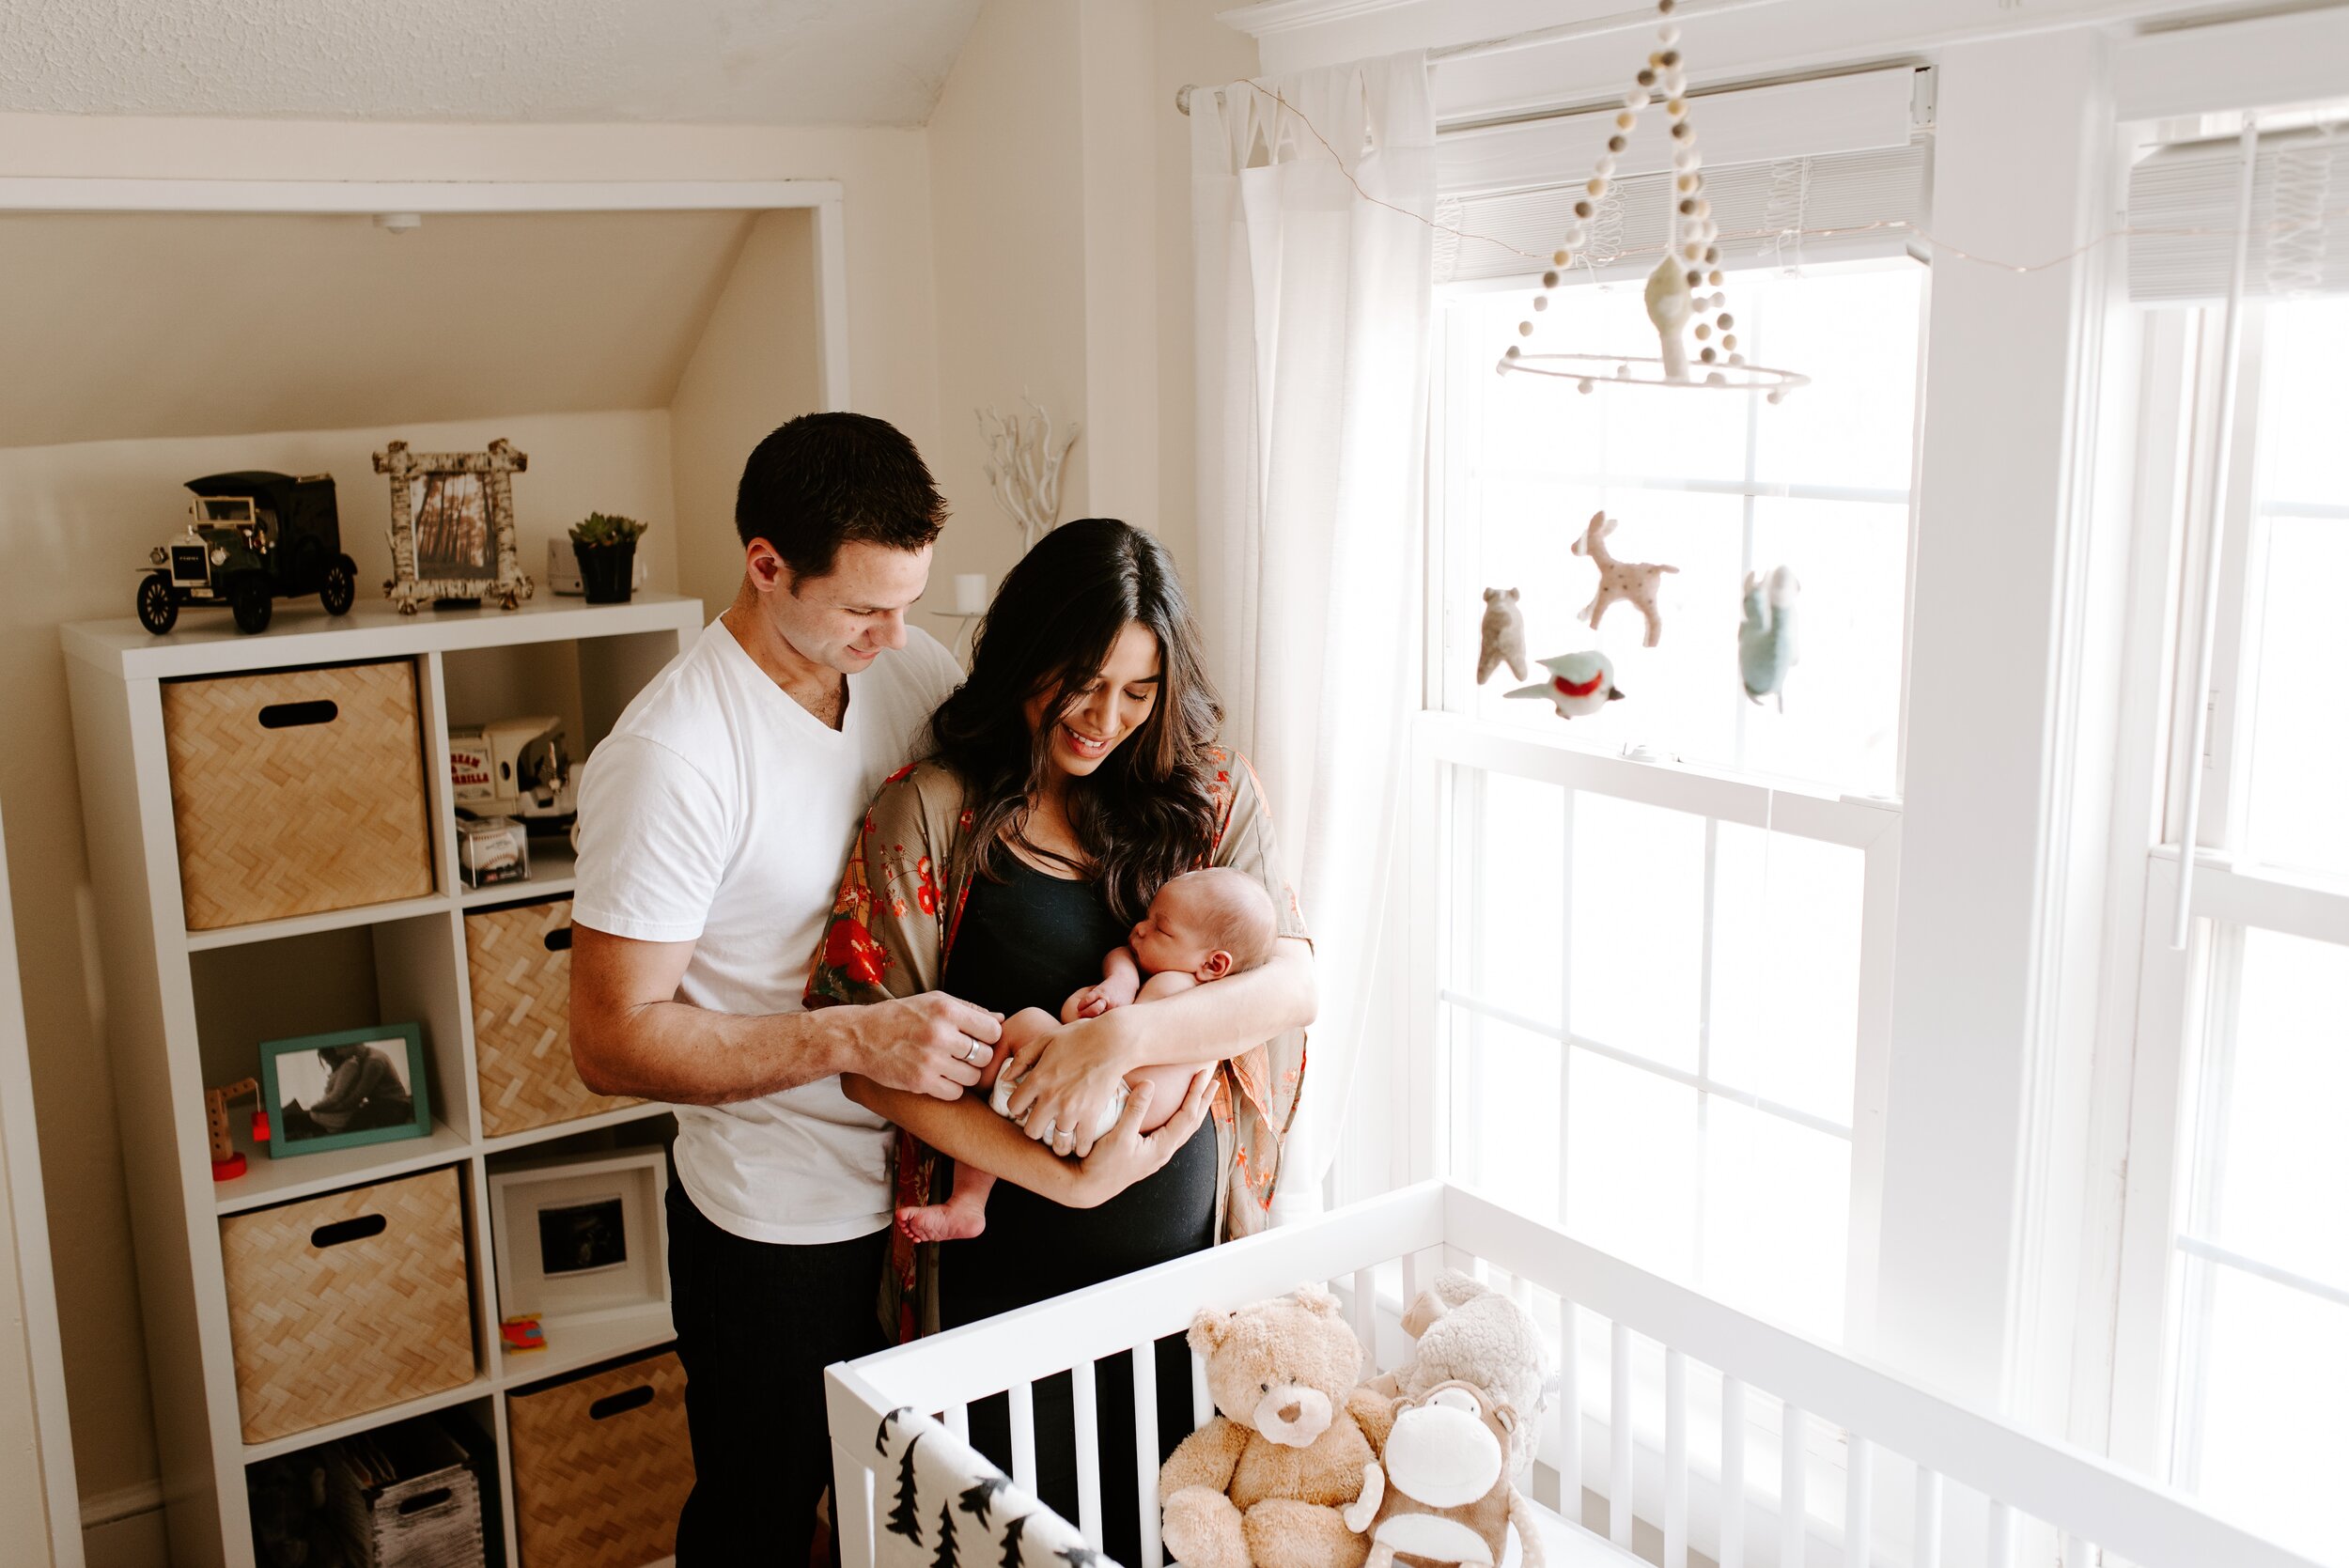 Connecticut New England At Home in Nursery Newborn Baby Held by Mom and Dad Lifestyle Portrait.jpg